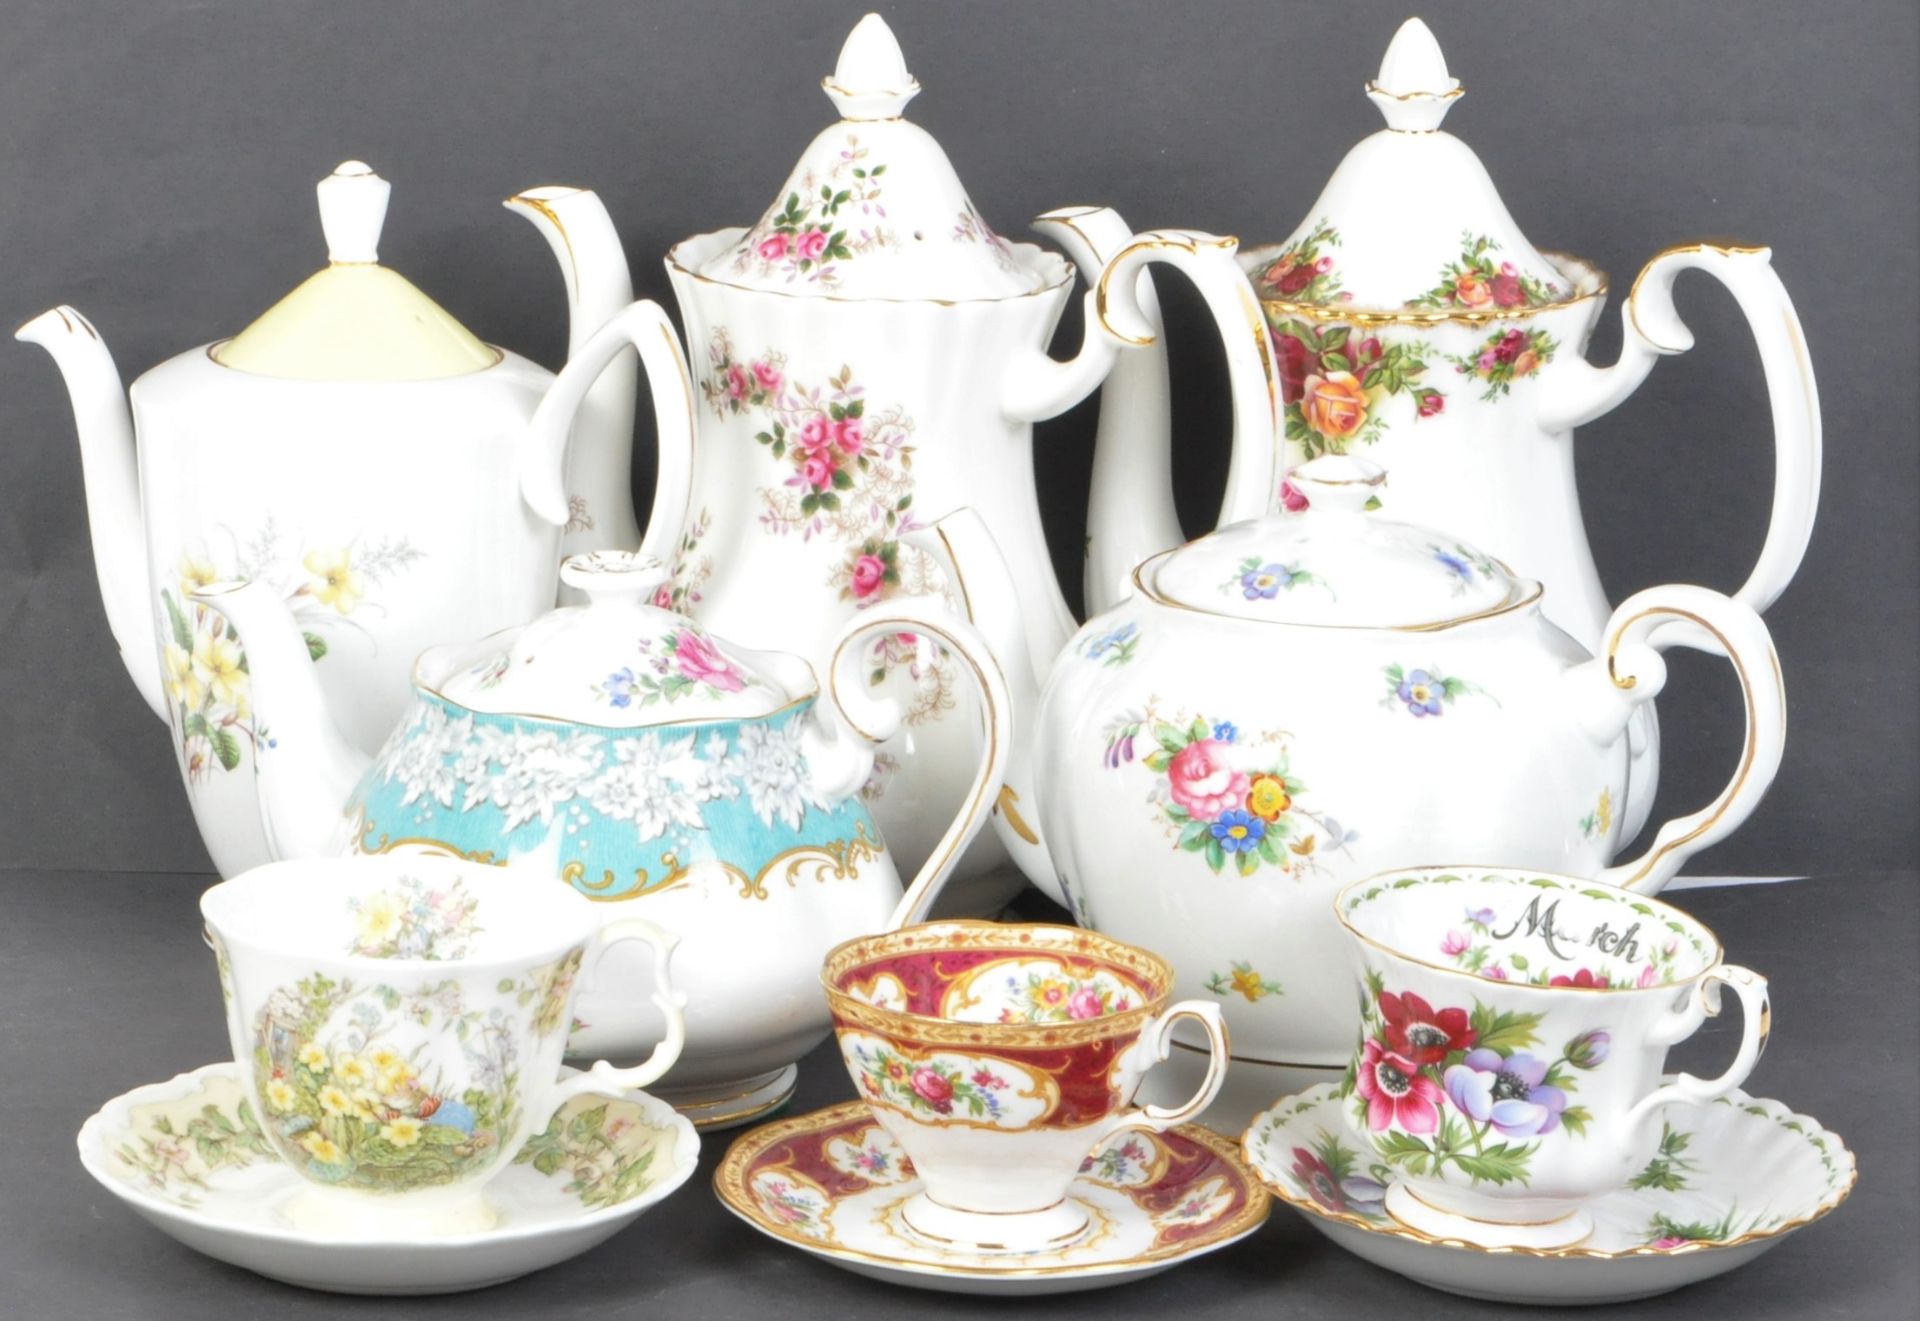 COLLECTION OF VINTAGE 20TH CENTURY ROYAL ALBERT CERAMIC TEAPOTS